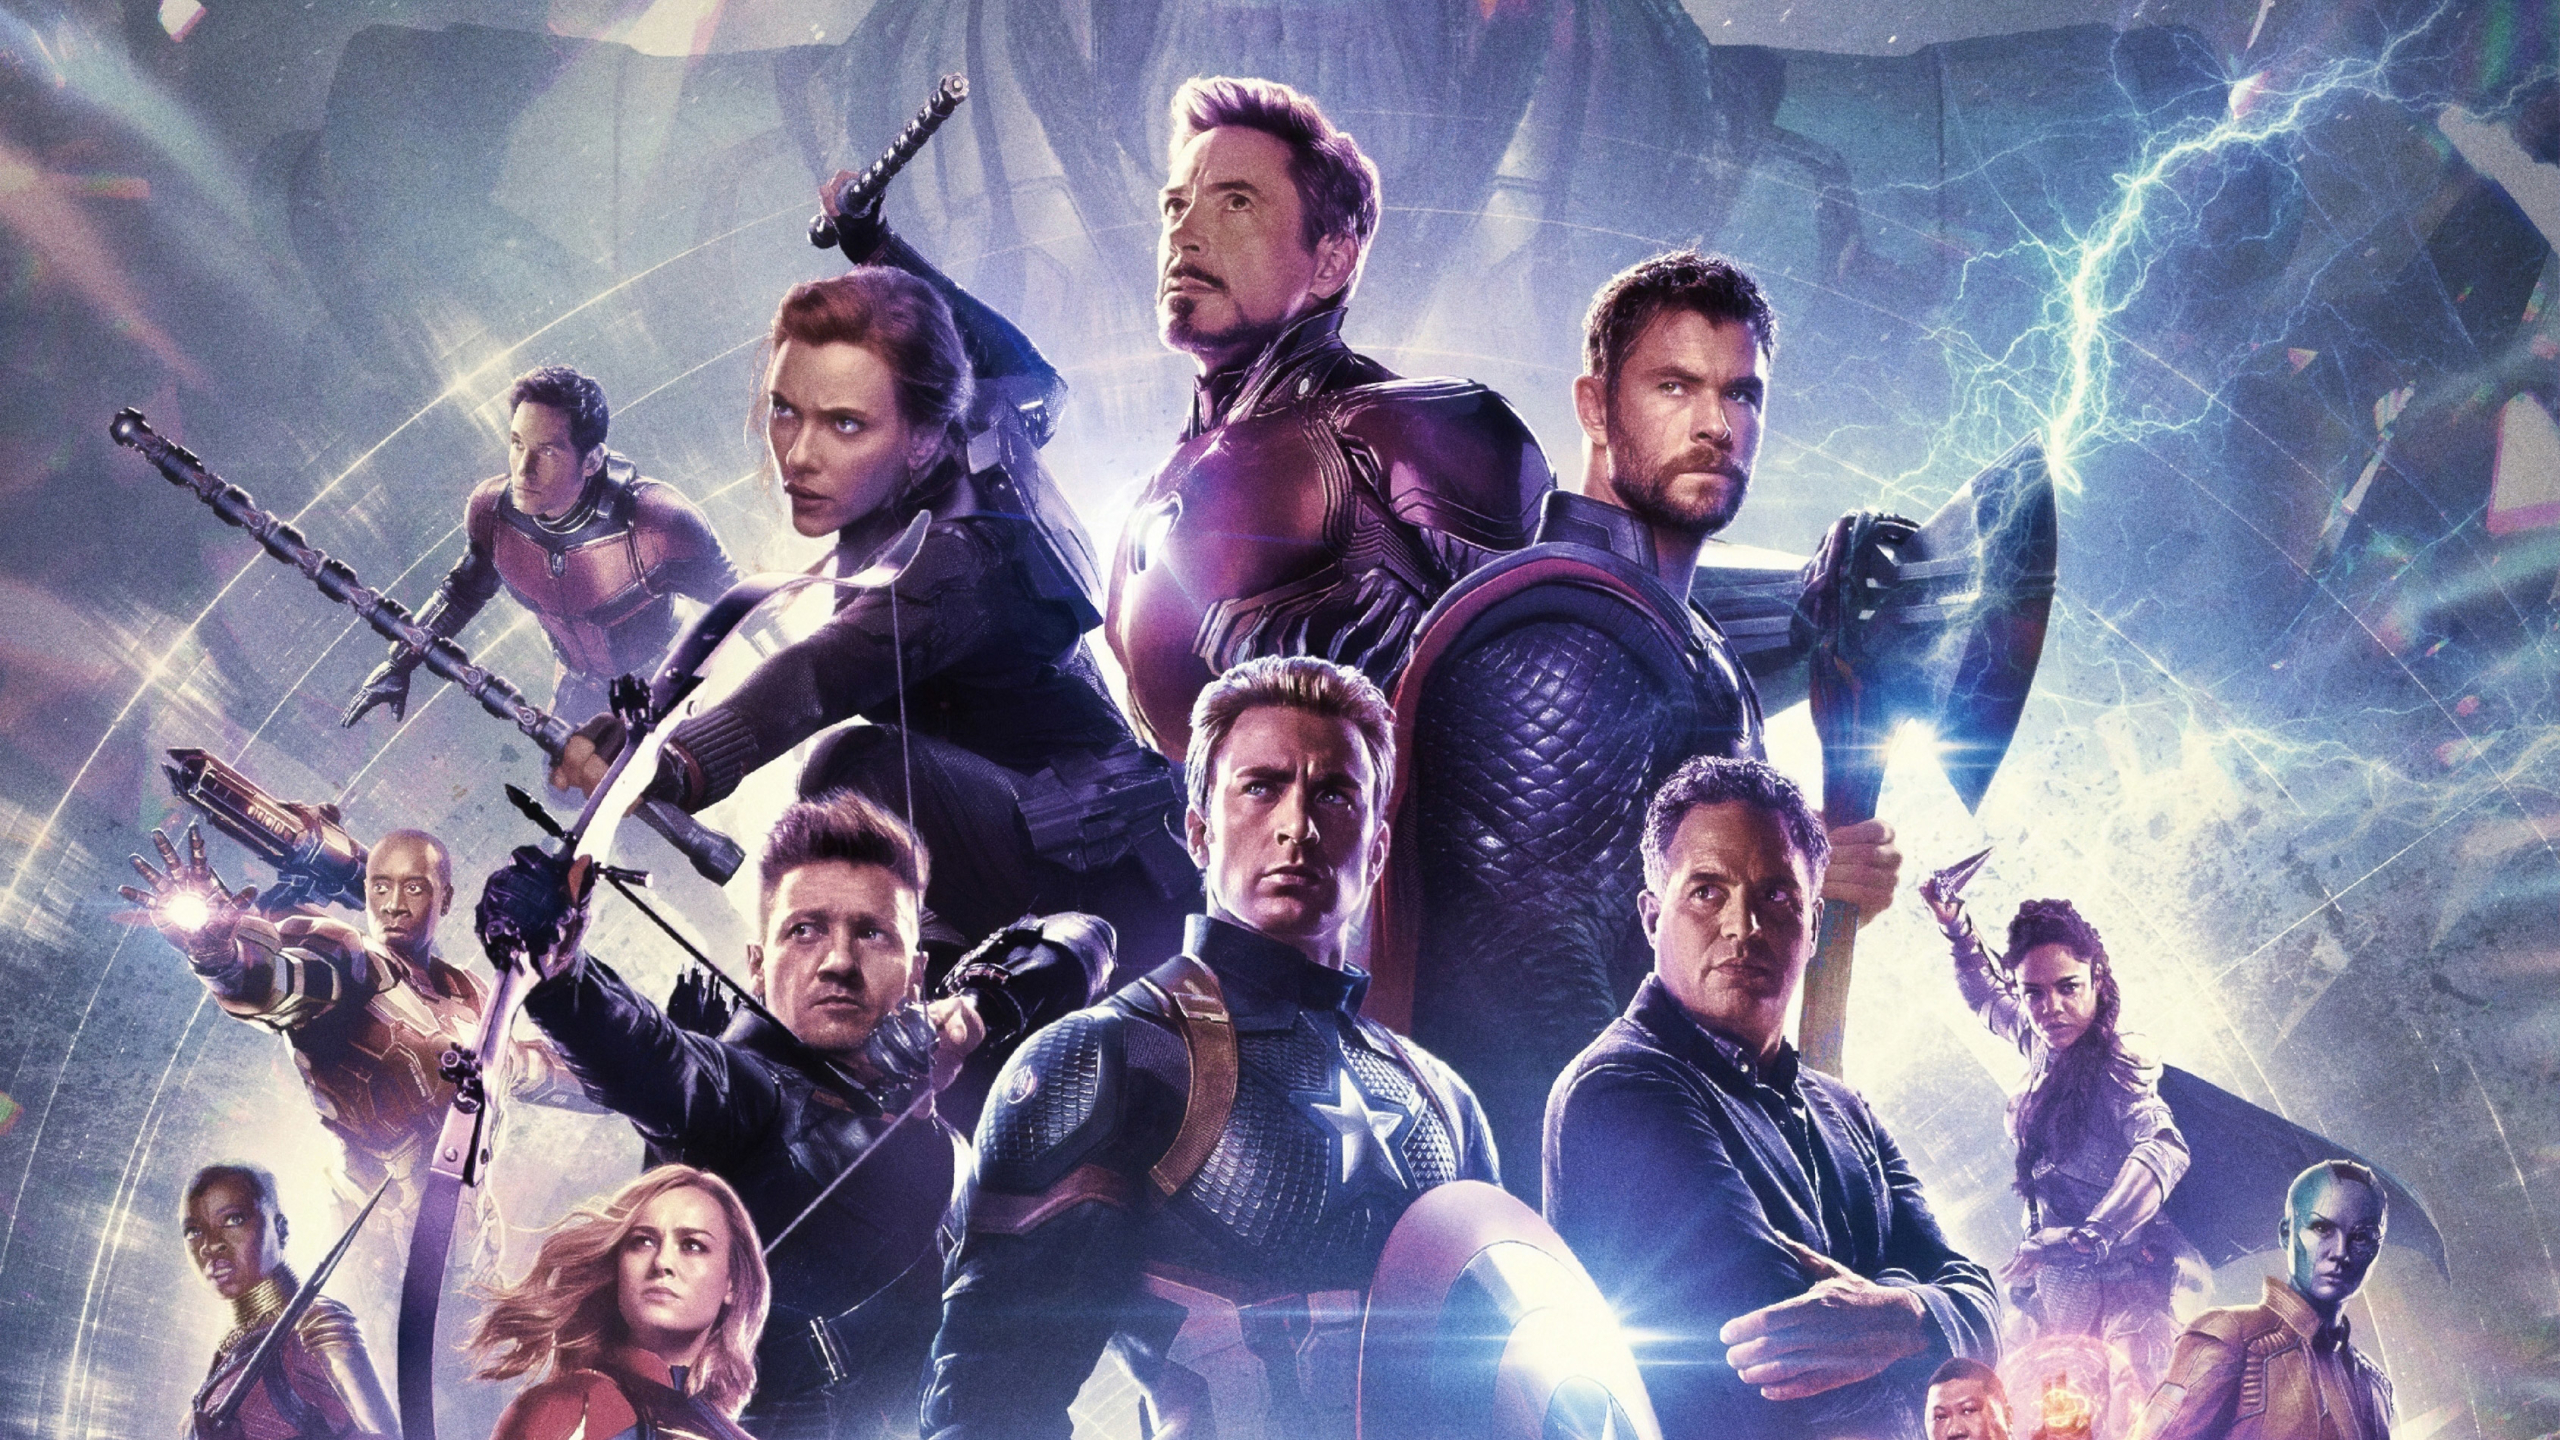 2560x1440 Avengers Endgame International Poster 1440p Resolution Wallpaper Hd Movies 4k Wallpapers Images Photos And Background